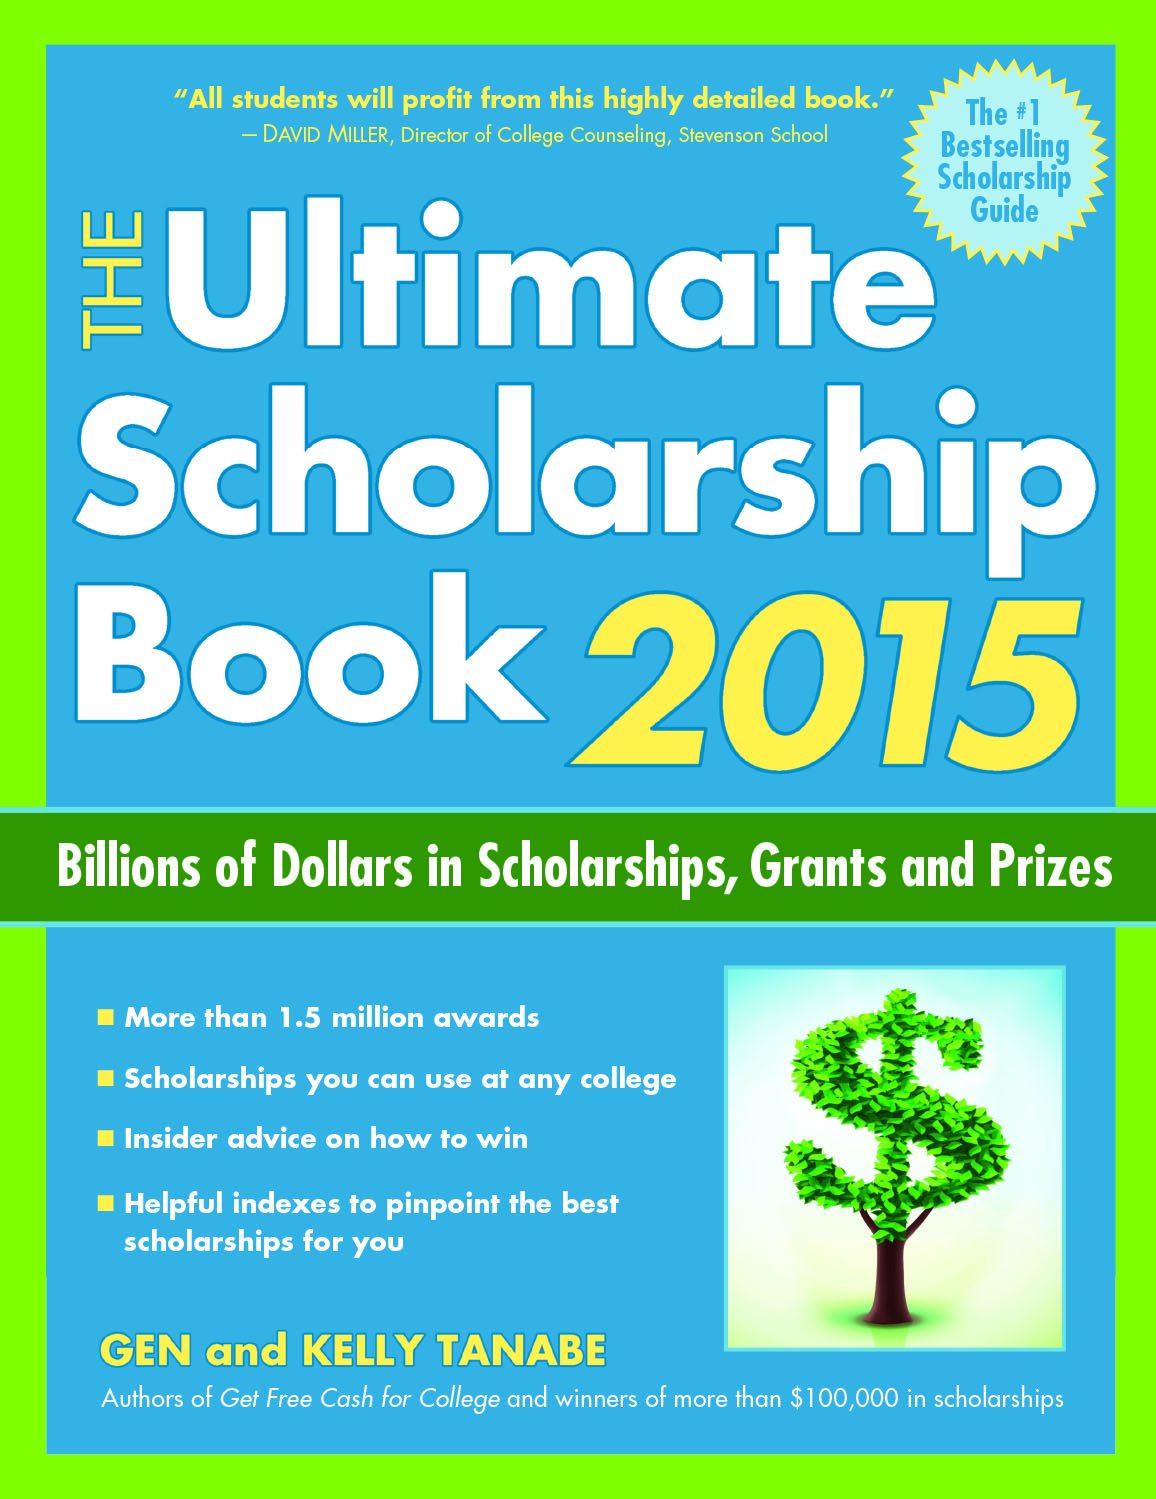 The Ultimate Scholarship Book 2015: Billions of Dollars in Scholarships, Grants and Prizes